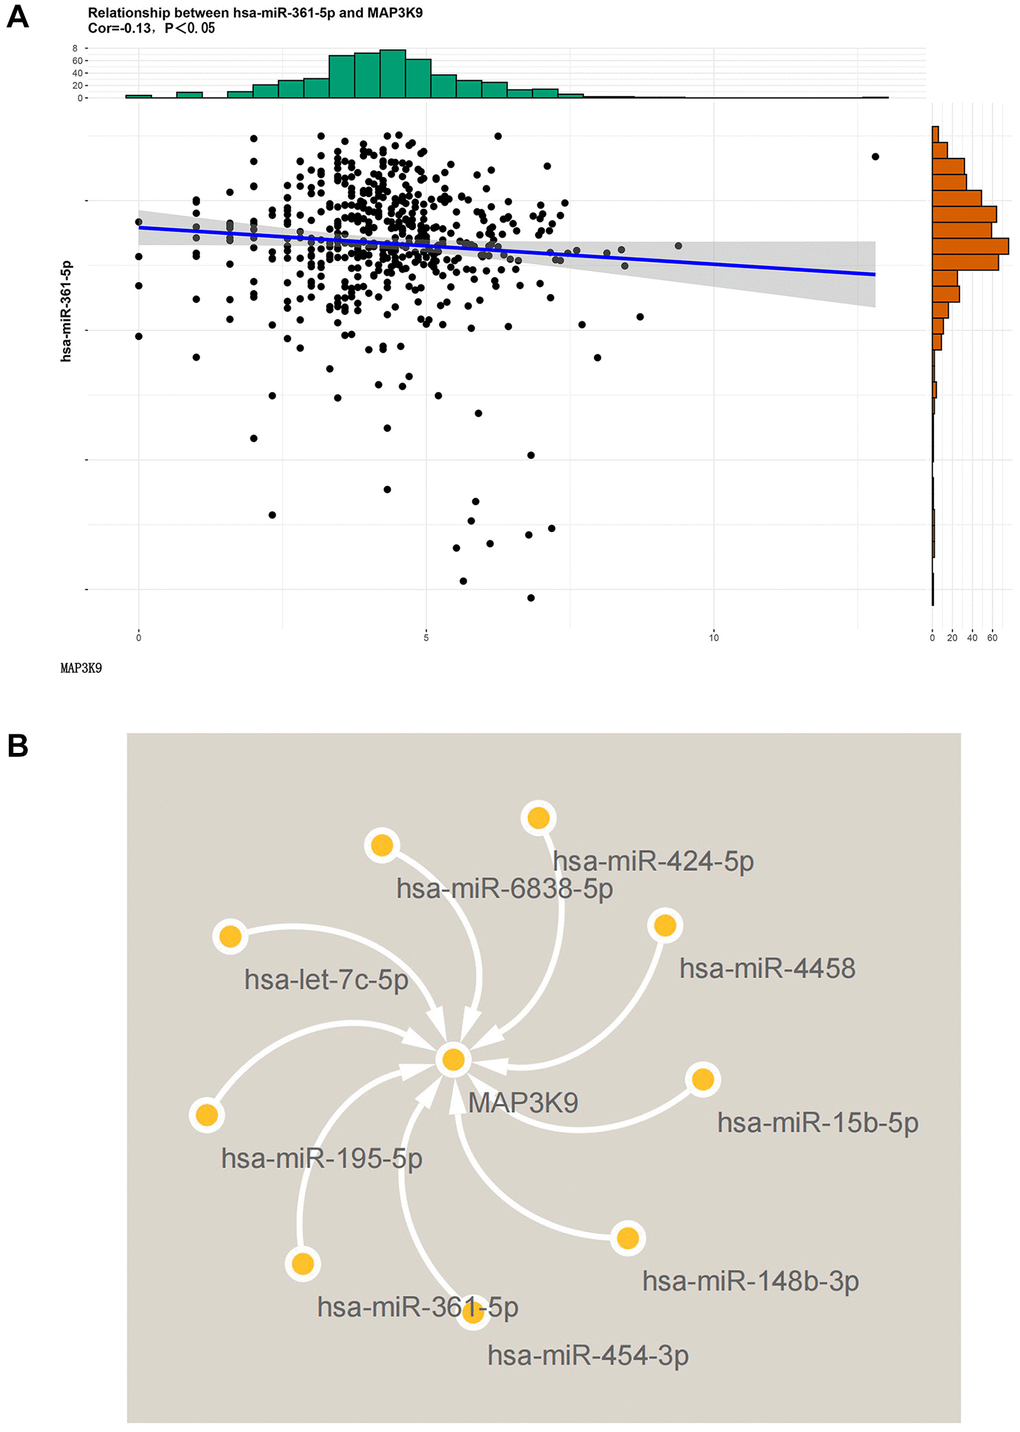 Diagram of the results of bioinformatics analysis. (A) The correlation between MAP3K9 and miR-361-5p was analyzed based on the Targetscan database. MAP3K9 was negatively correlated with miR-361-5p. (B) Graph of MAP3K9-related miRNAs based on Cytoscape software.